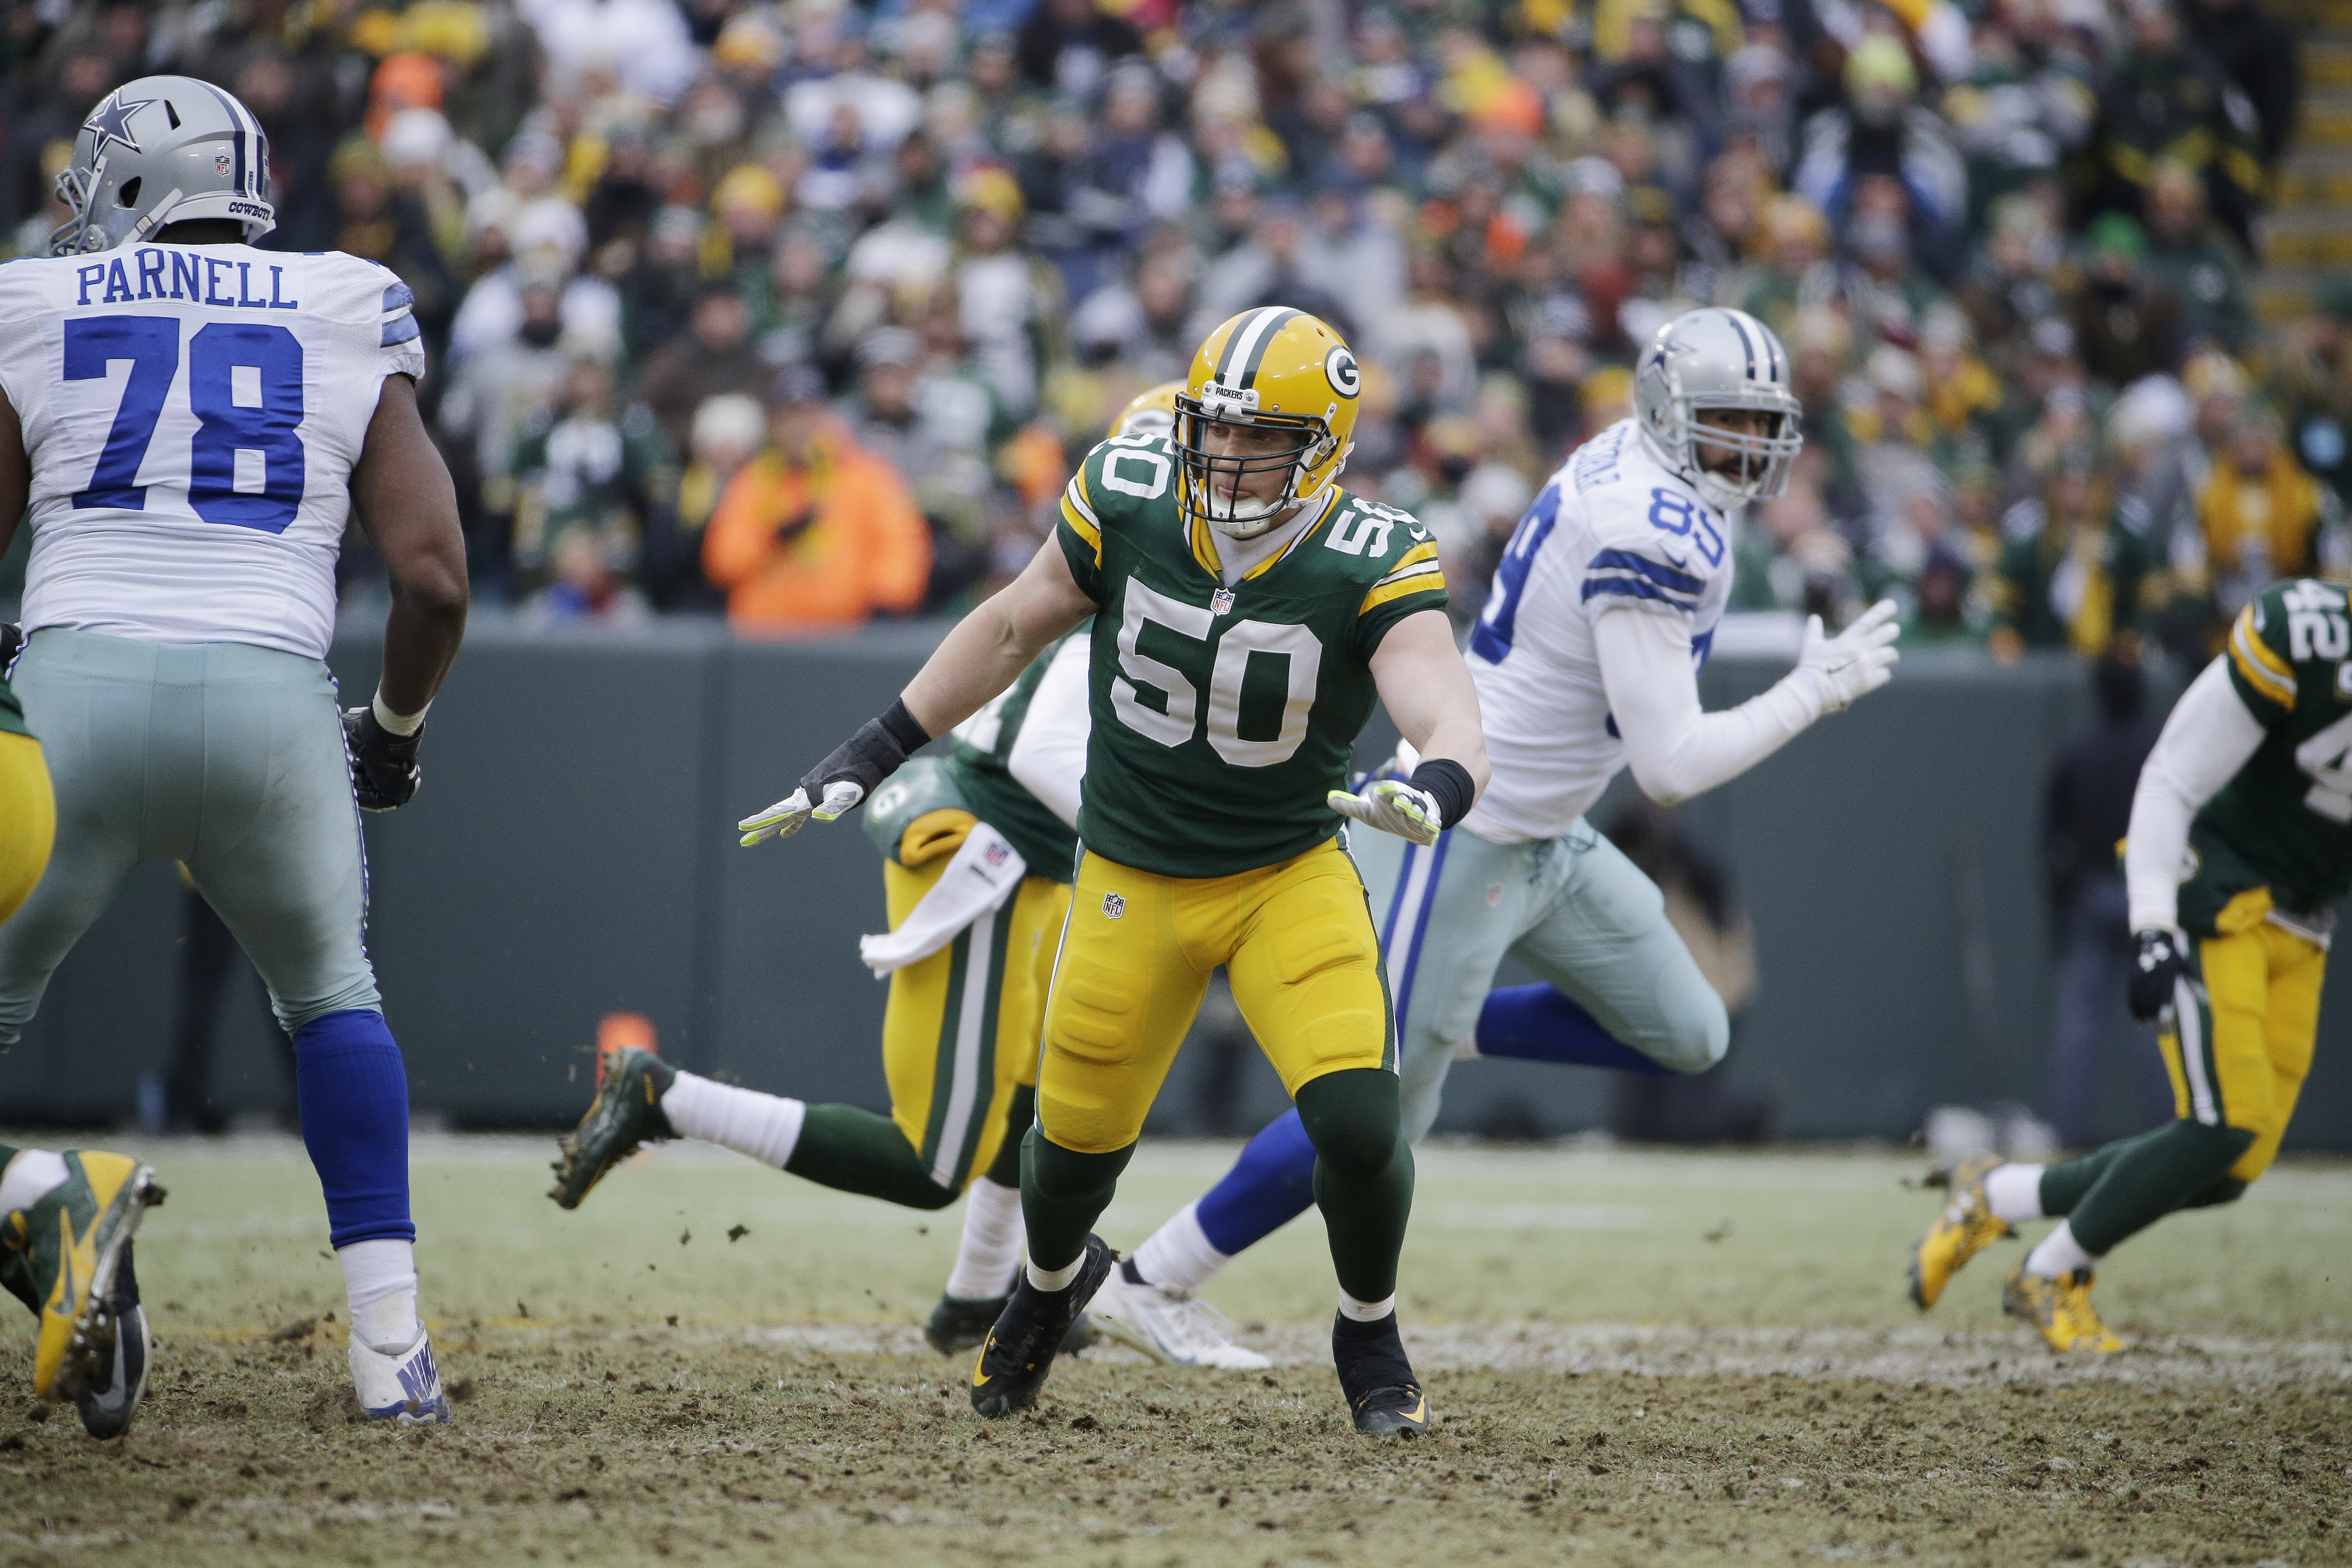 A.J. Hawk to retire with the Green Bay Packers - Washington Times